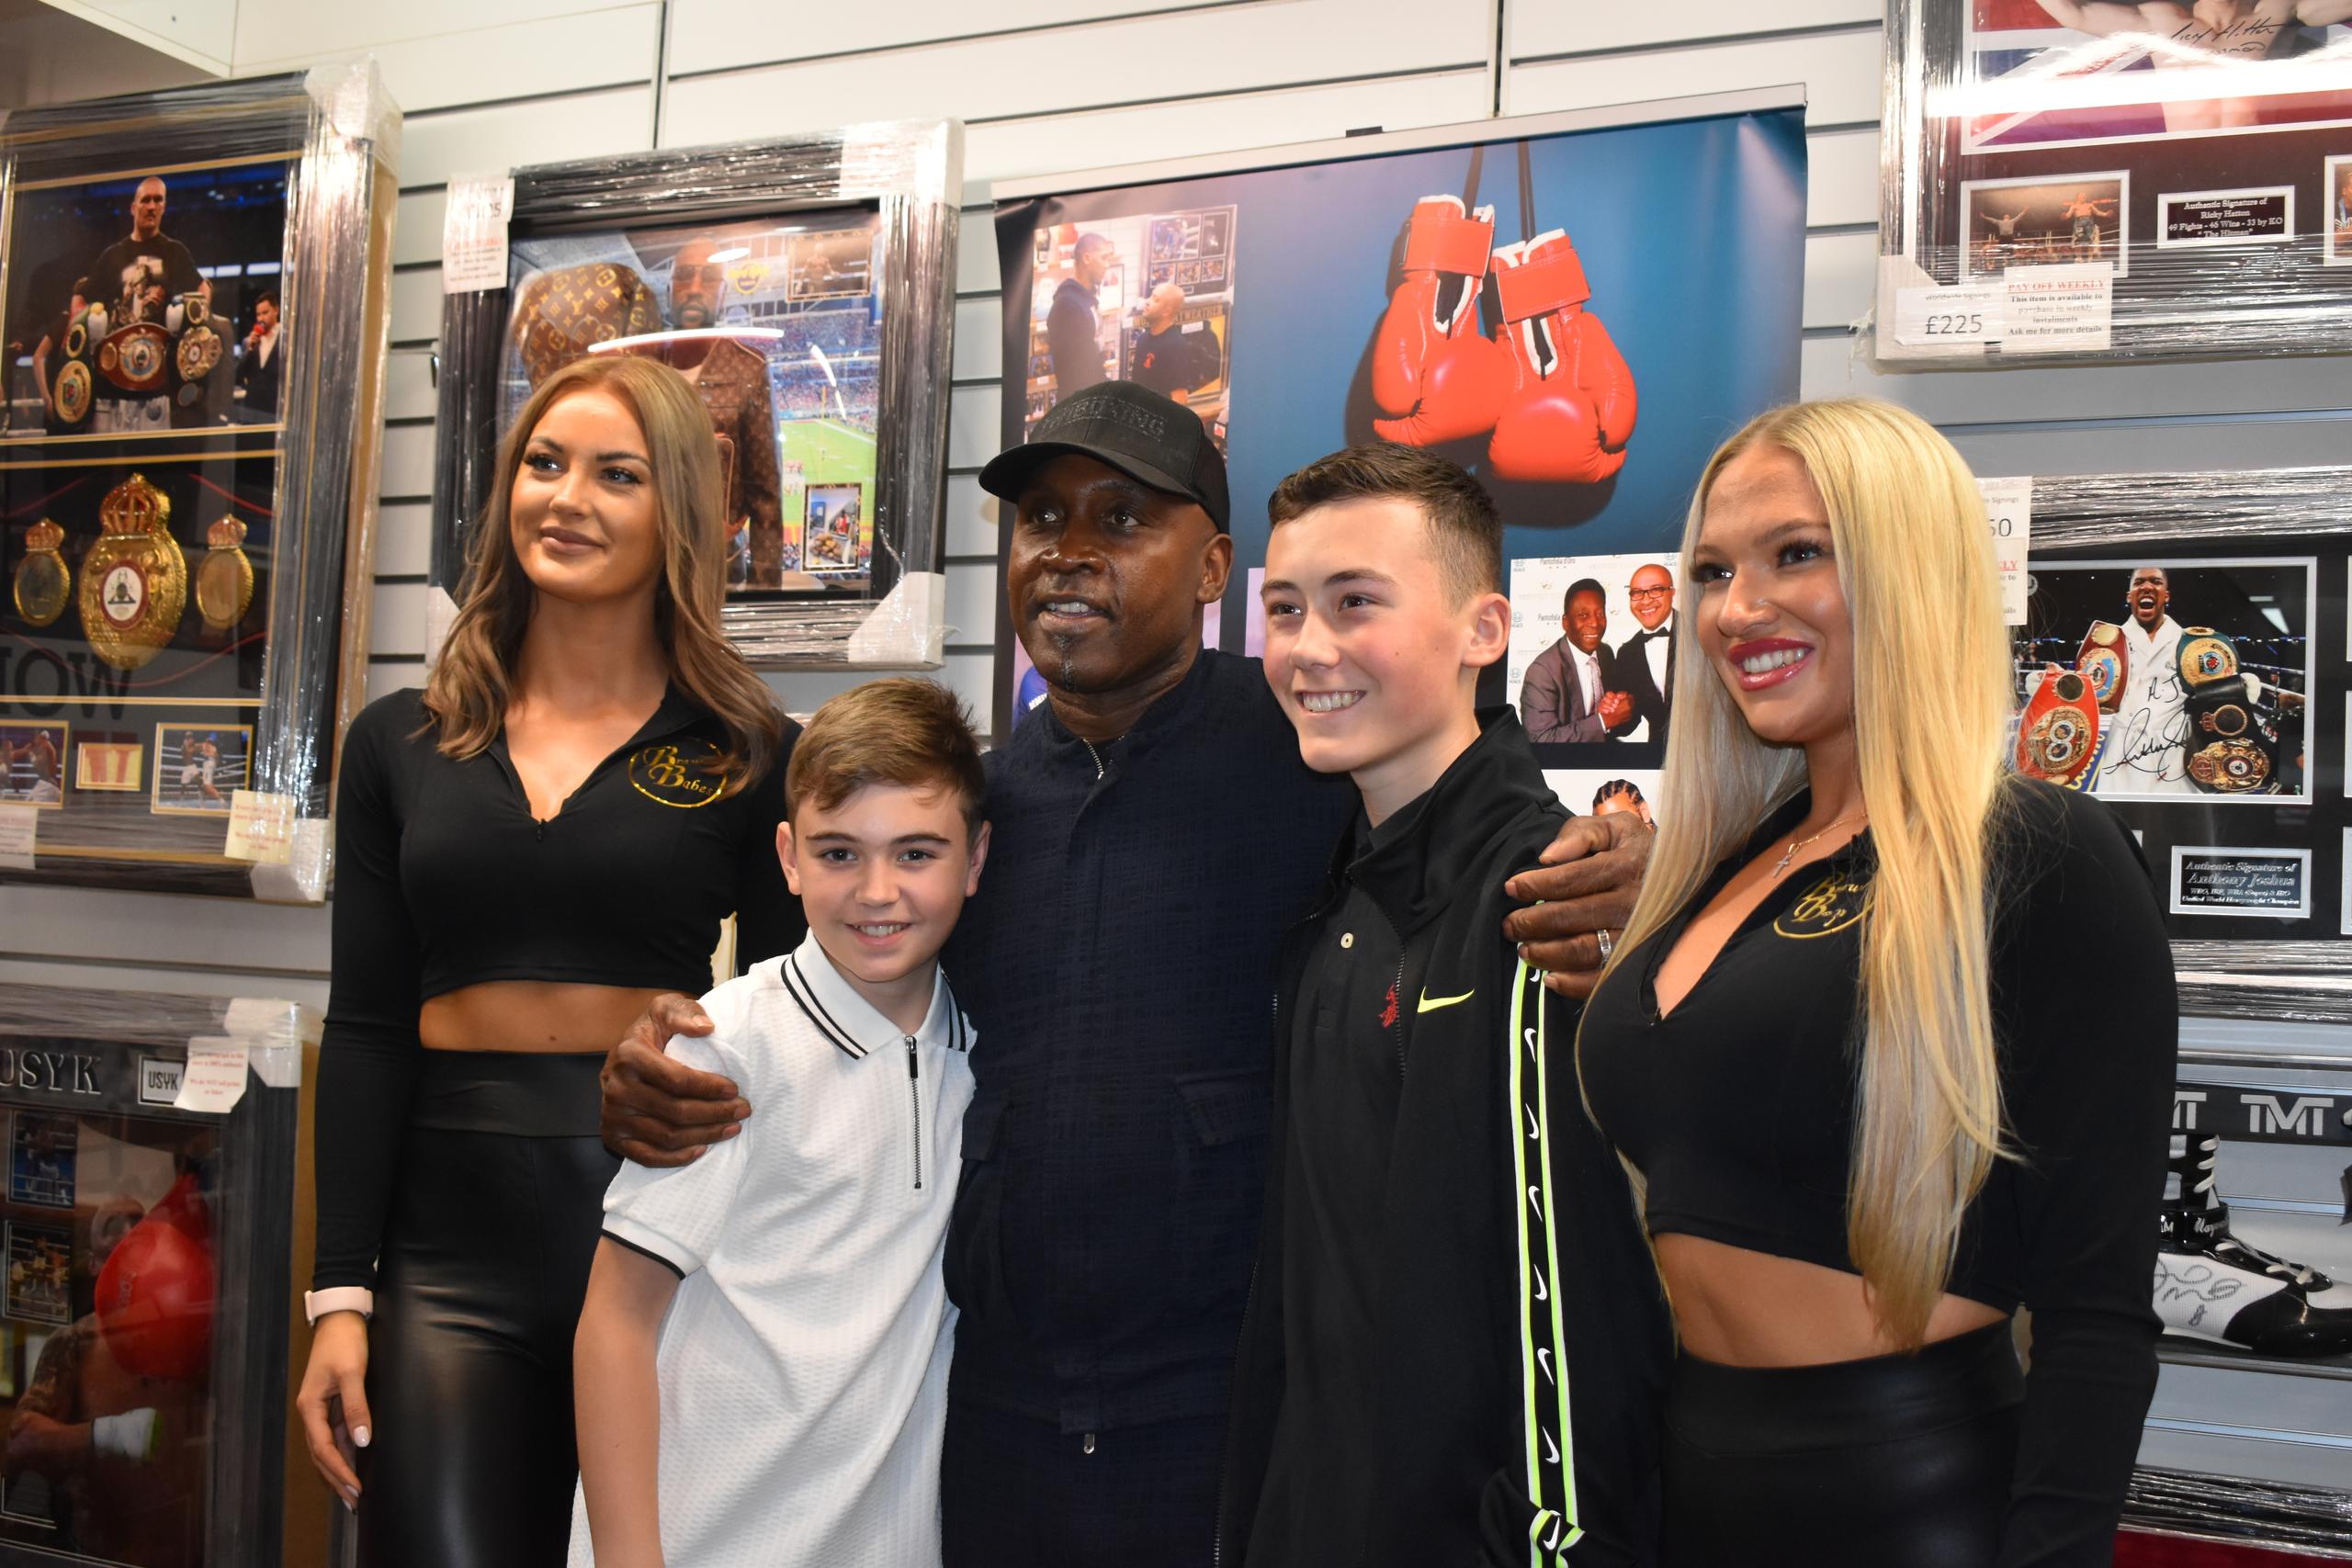 The former WBC World middleweight champion Nigel Benn visited Worldwide Signings on 7th October. hug